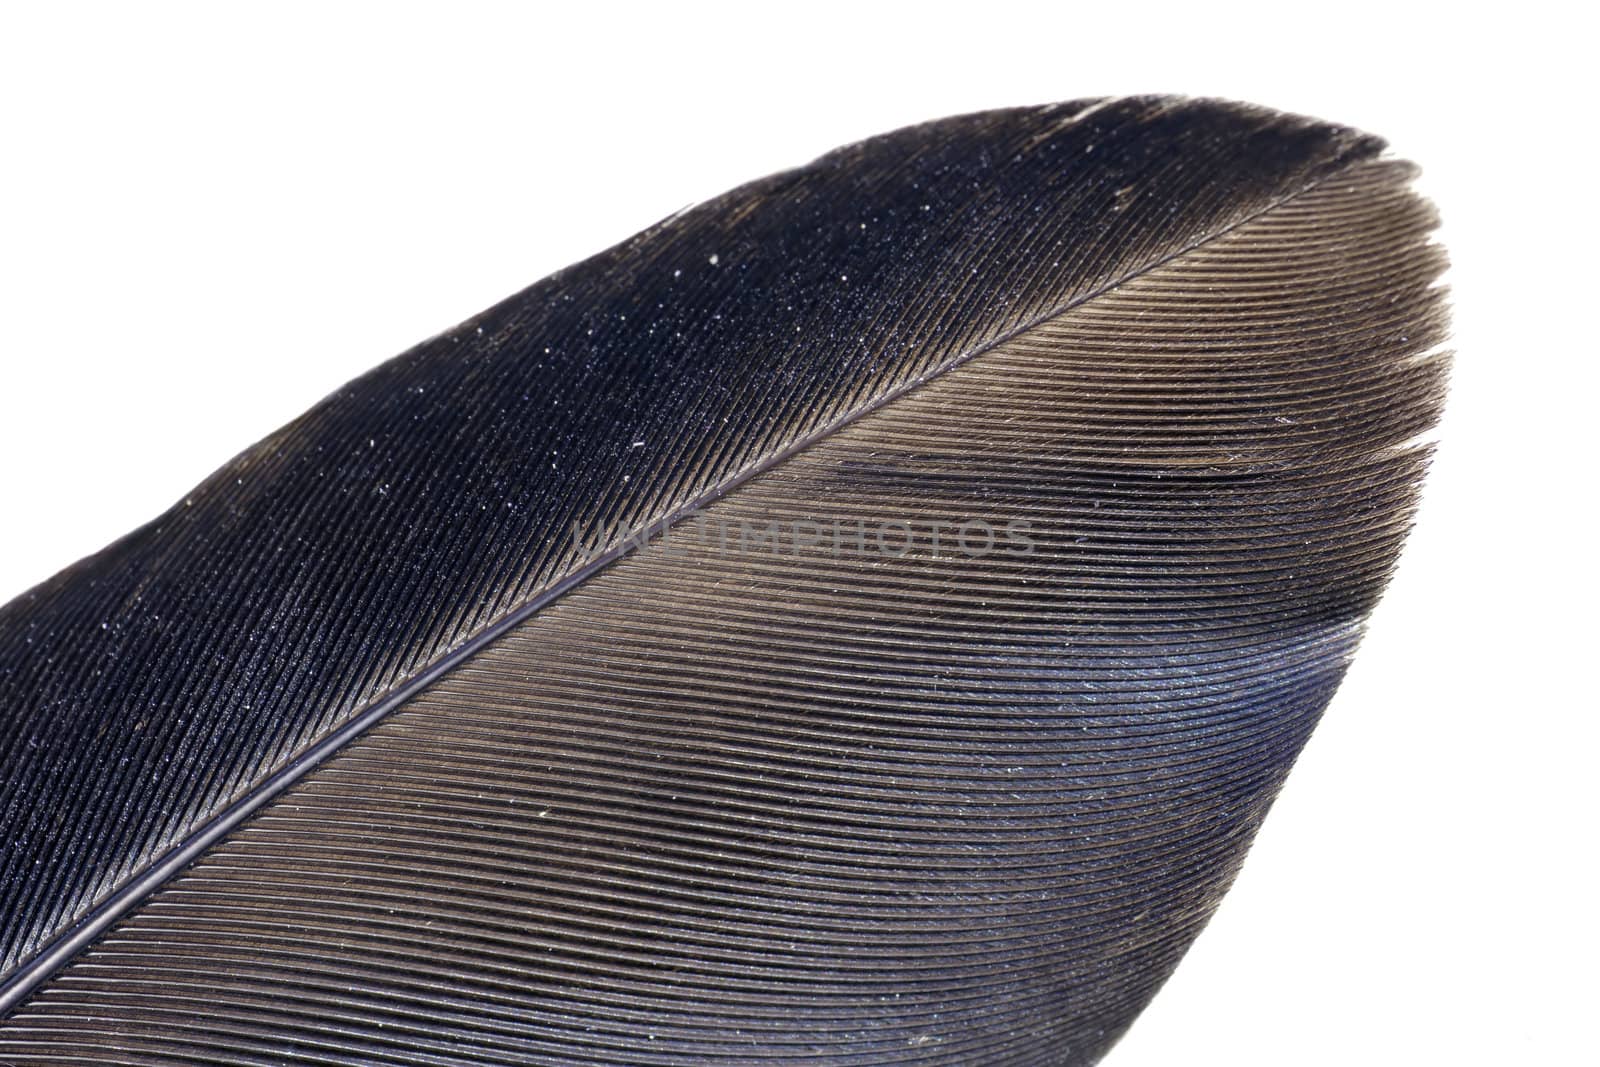 Crow's feather macro by Mirage3